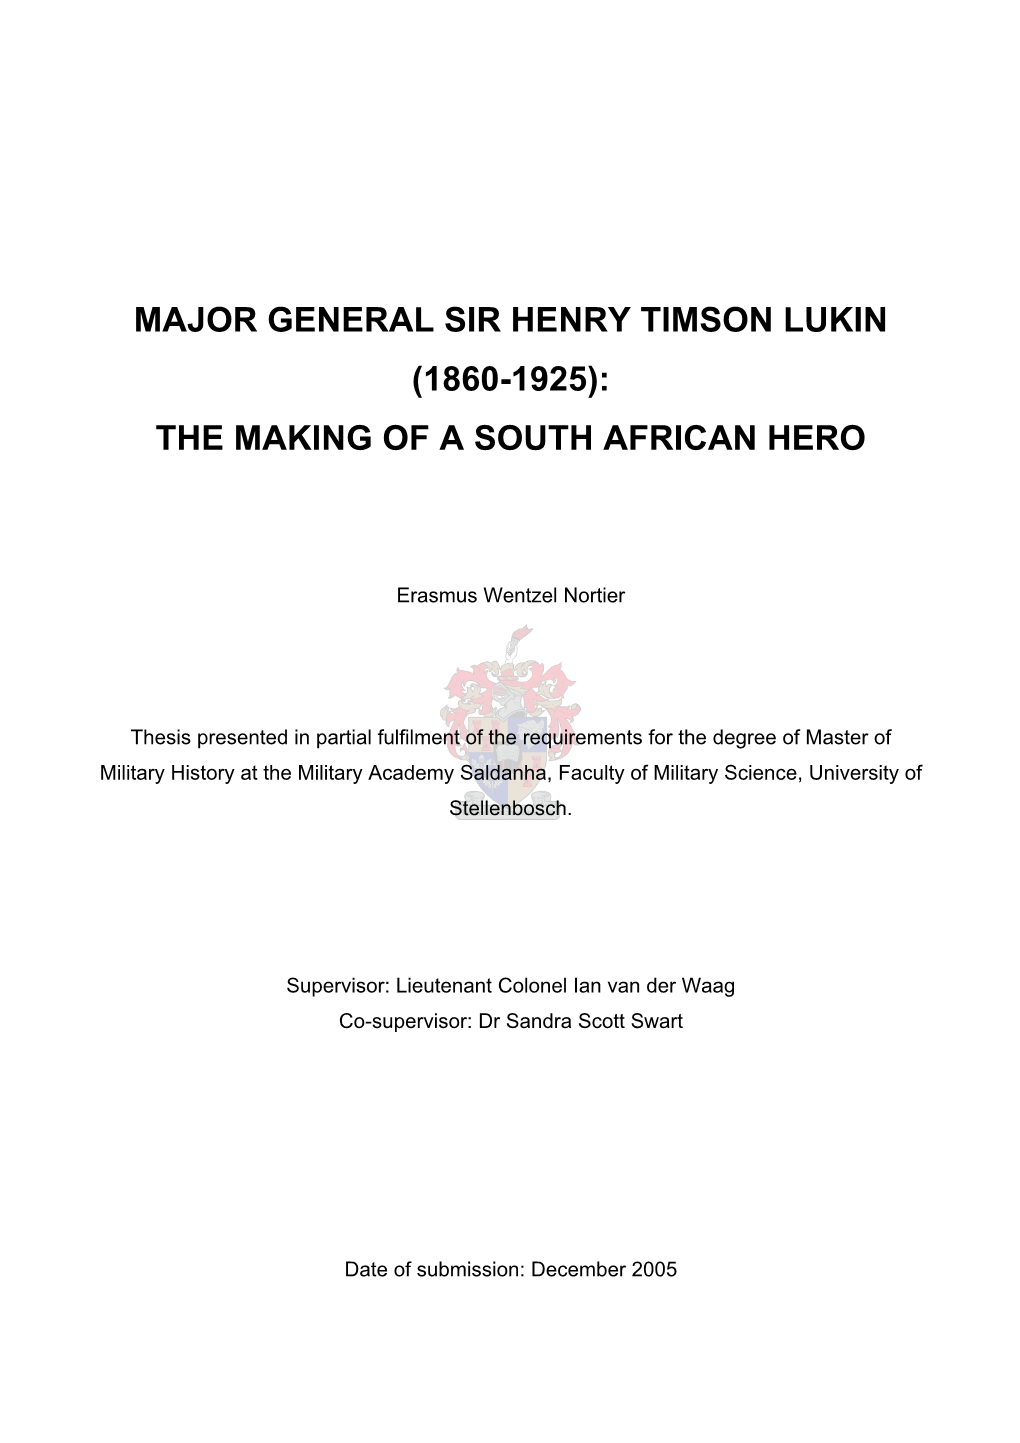 Major General Sir Henry Timson Lukin (1860-1925): the Making of a South African Hero